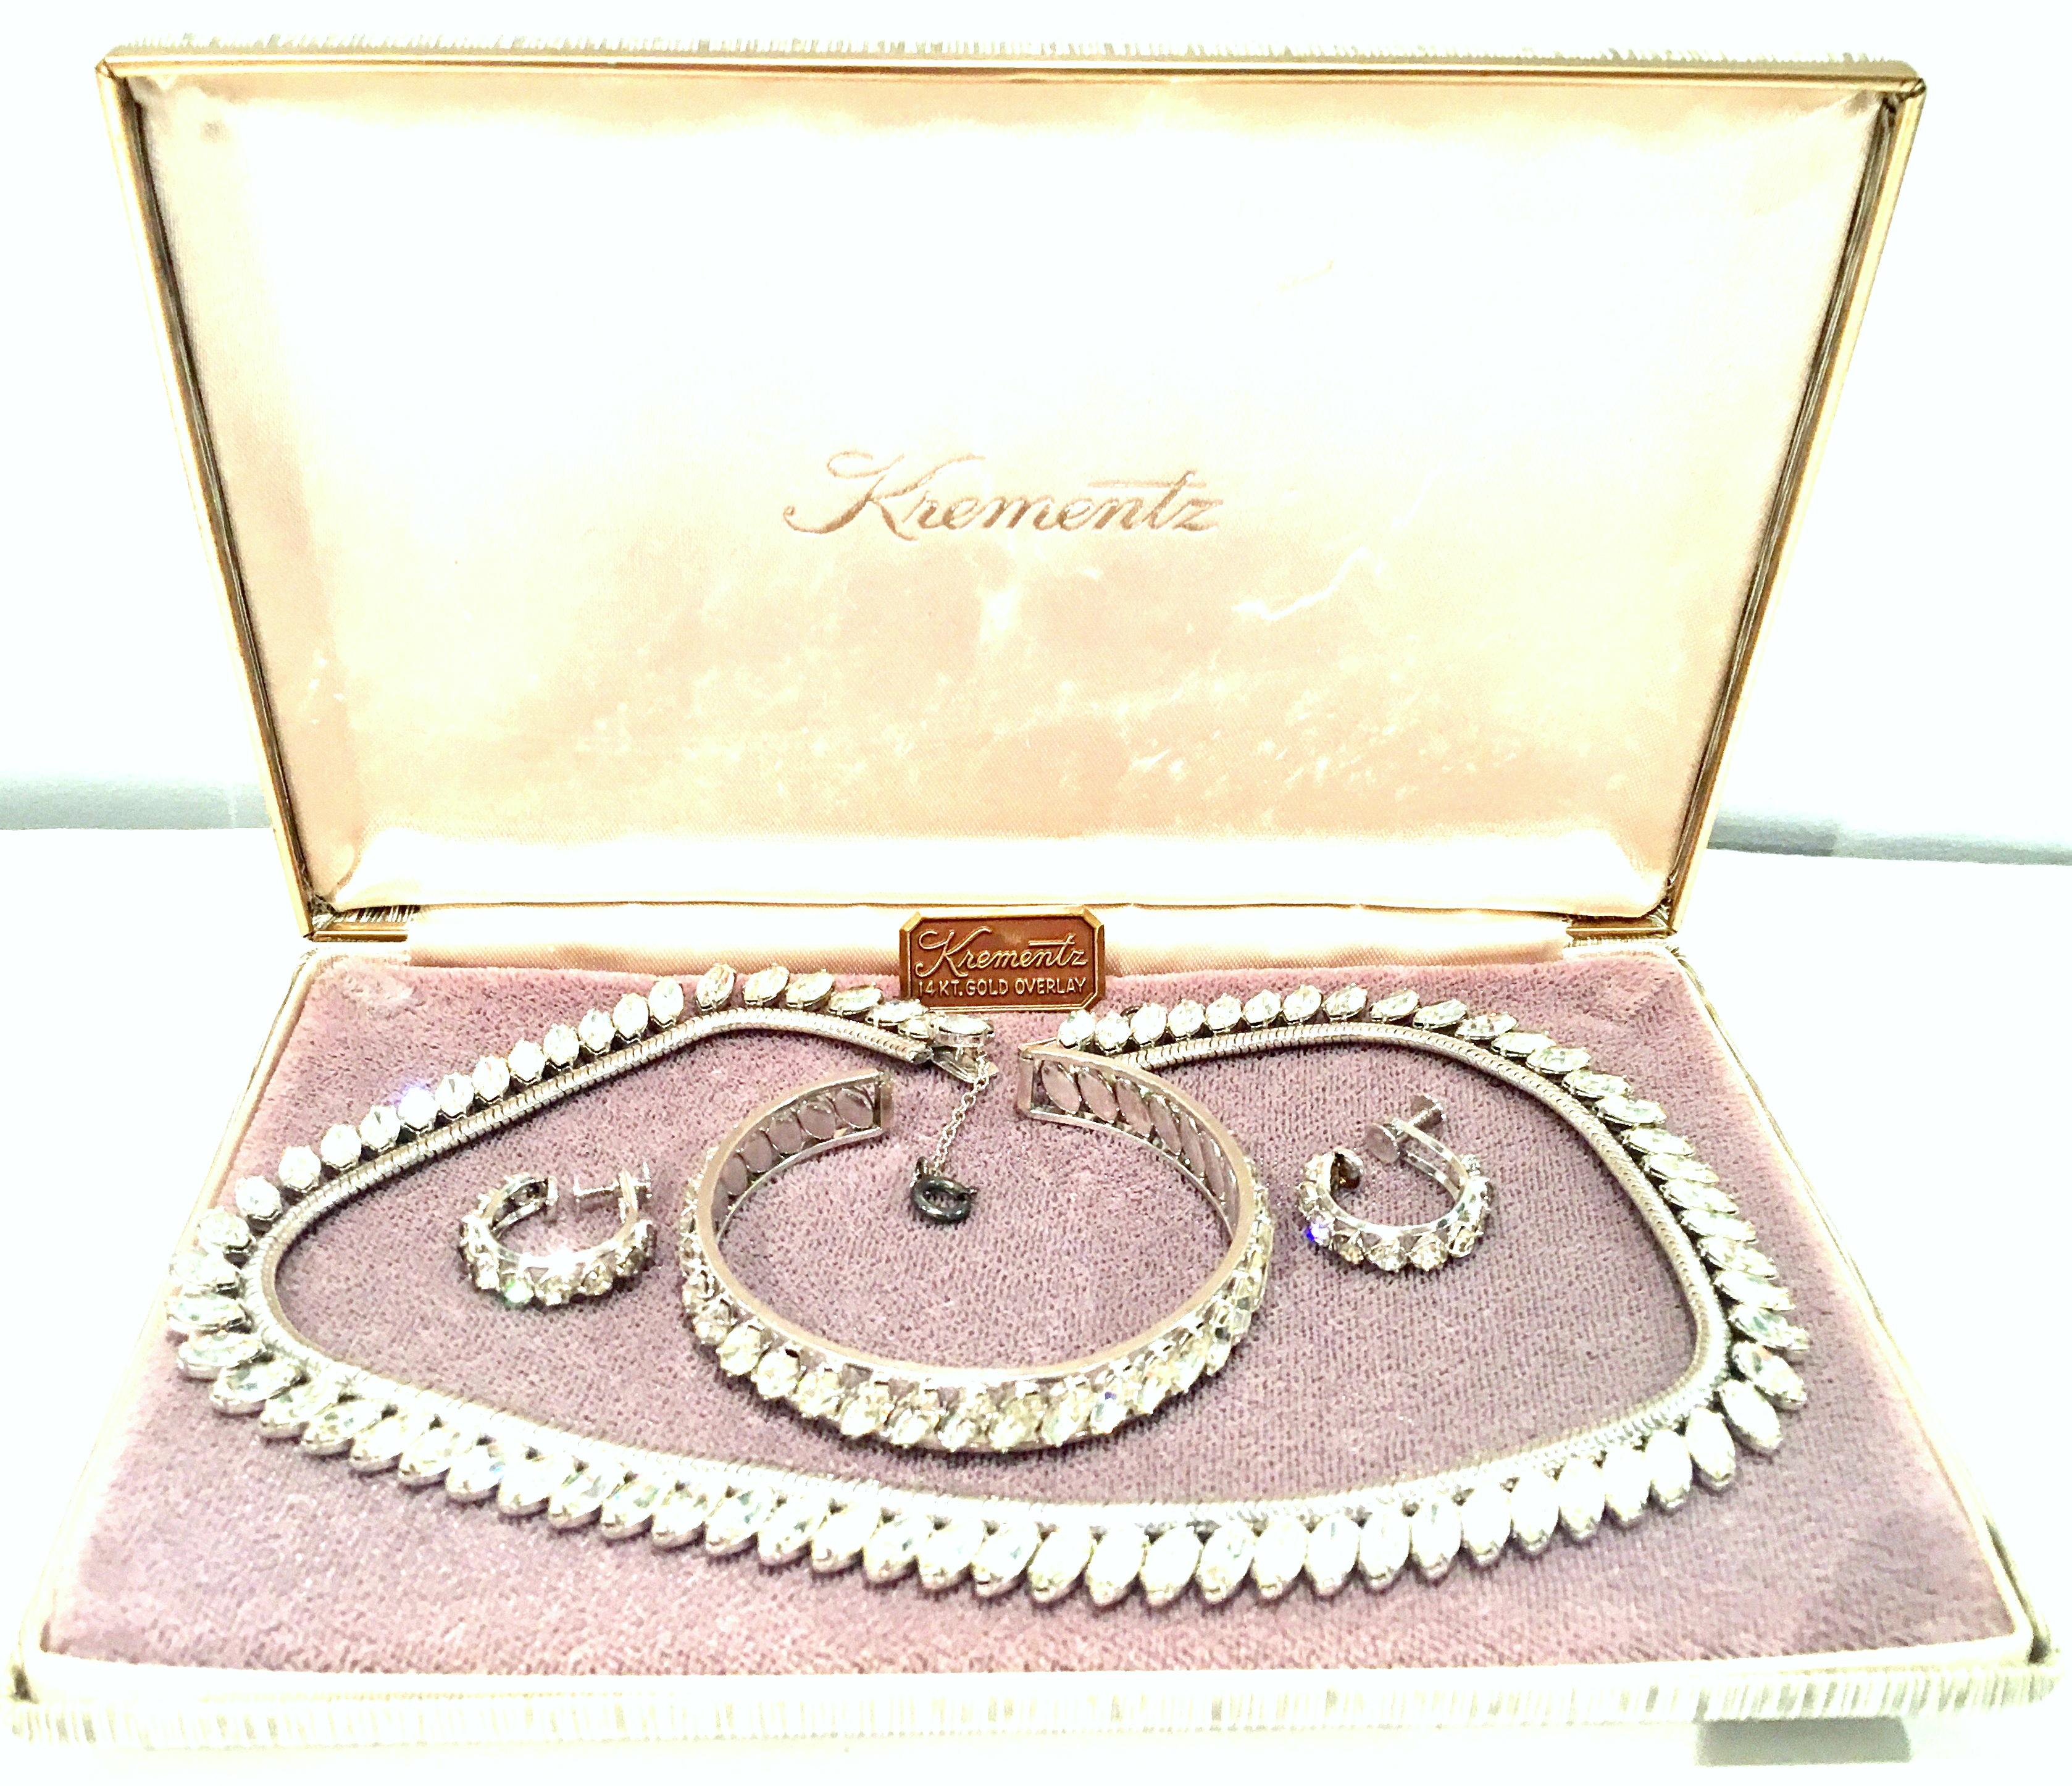 Mid - 20th Century Krementz 14Kt. White Gold & Austrian Crystal Four Piece Demi-Parure Boxed Set. This coveted original box set and full demi parure includes, one choker style necklace, one cuff style bracelet and one pair of screw back hoop style